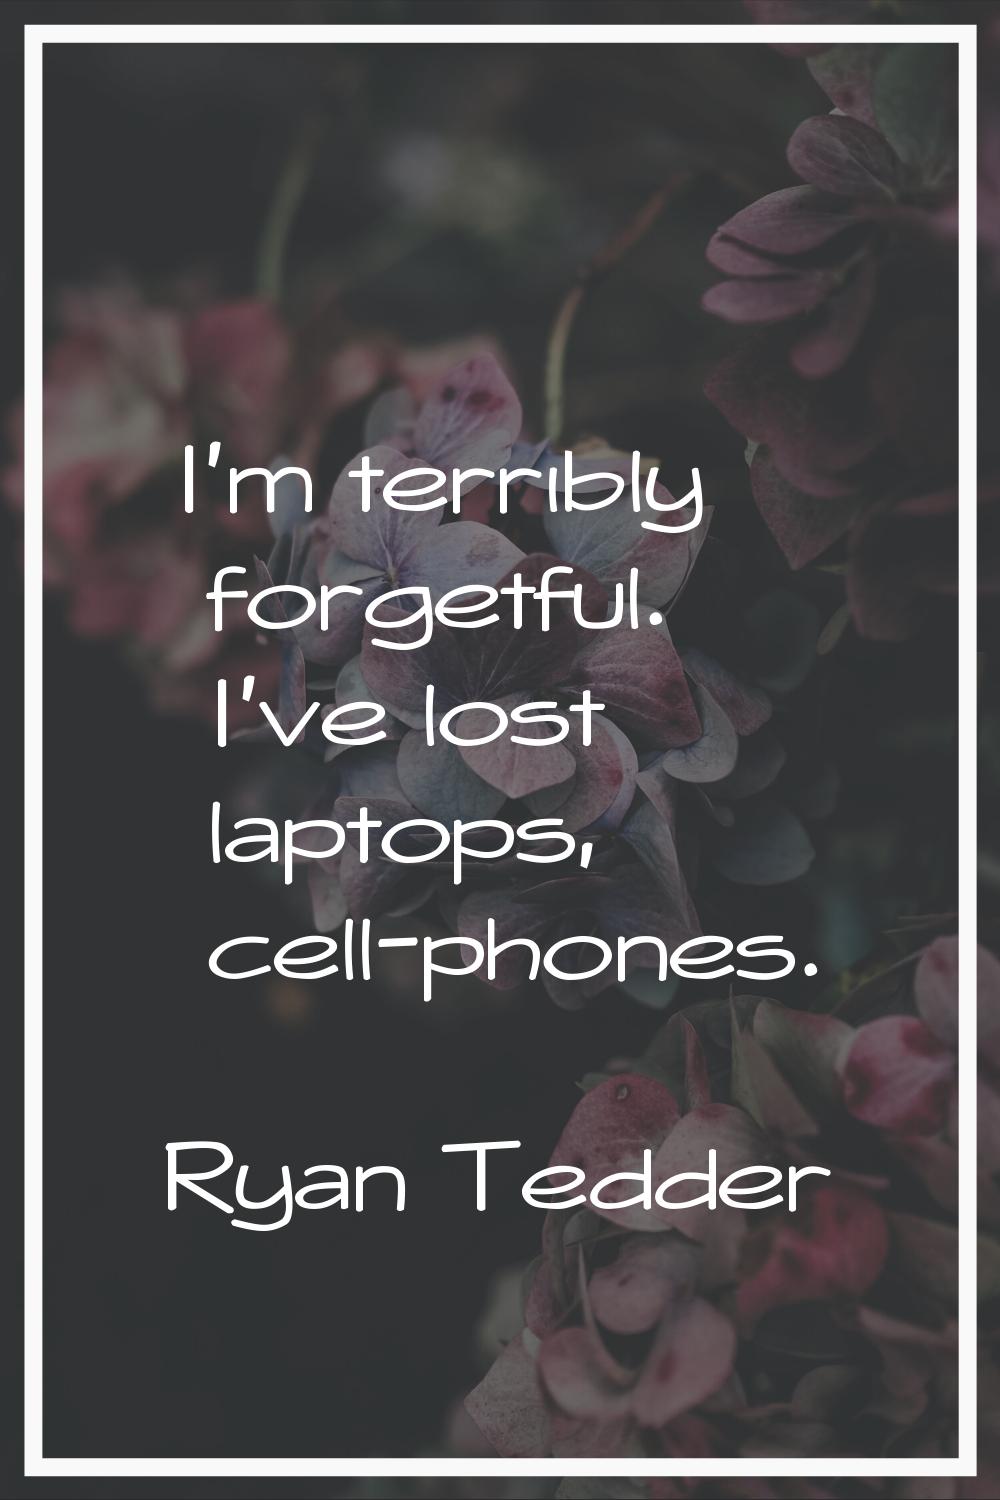 I'm terribly forgetful. I've lost laptops, cell-phones.